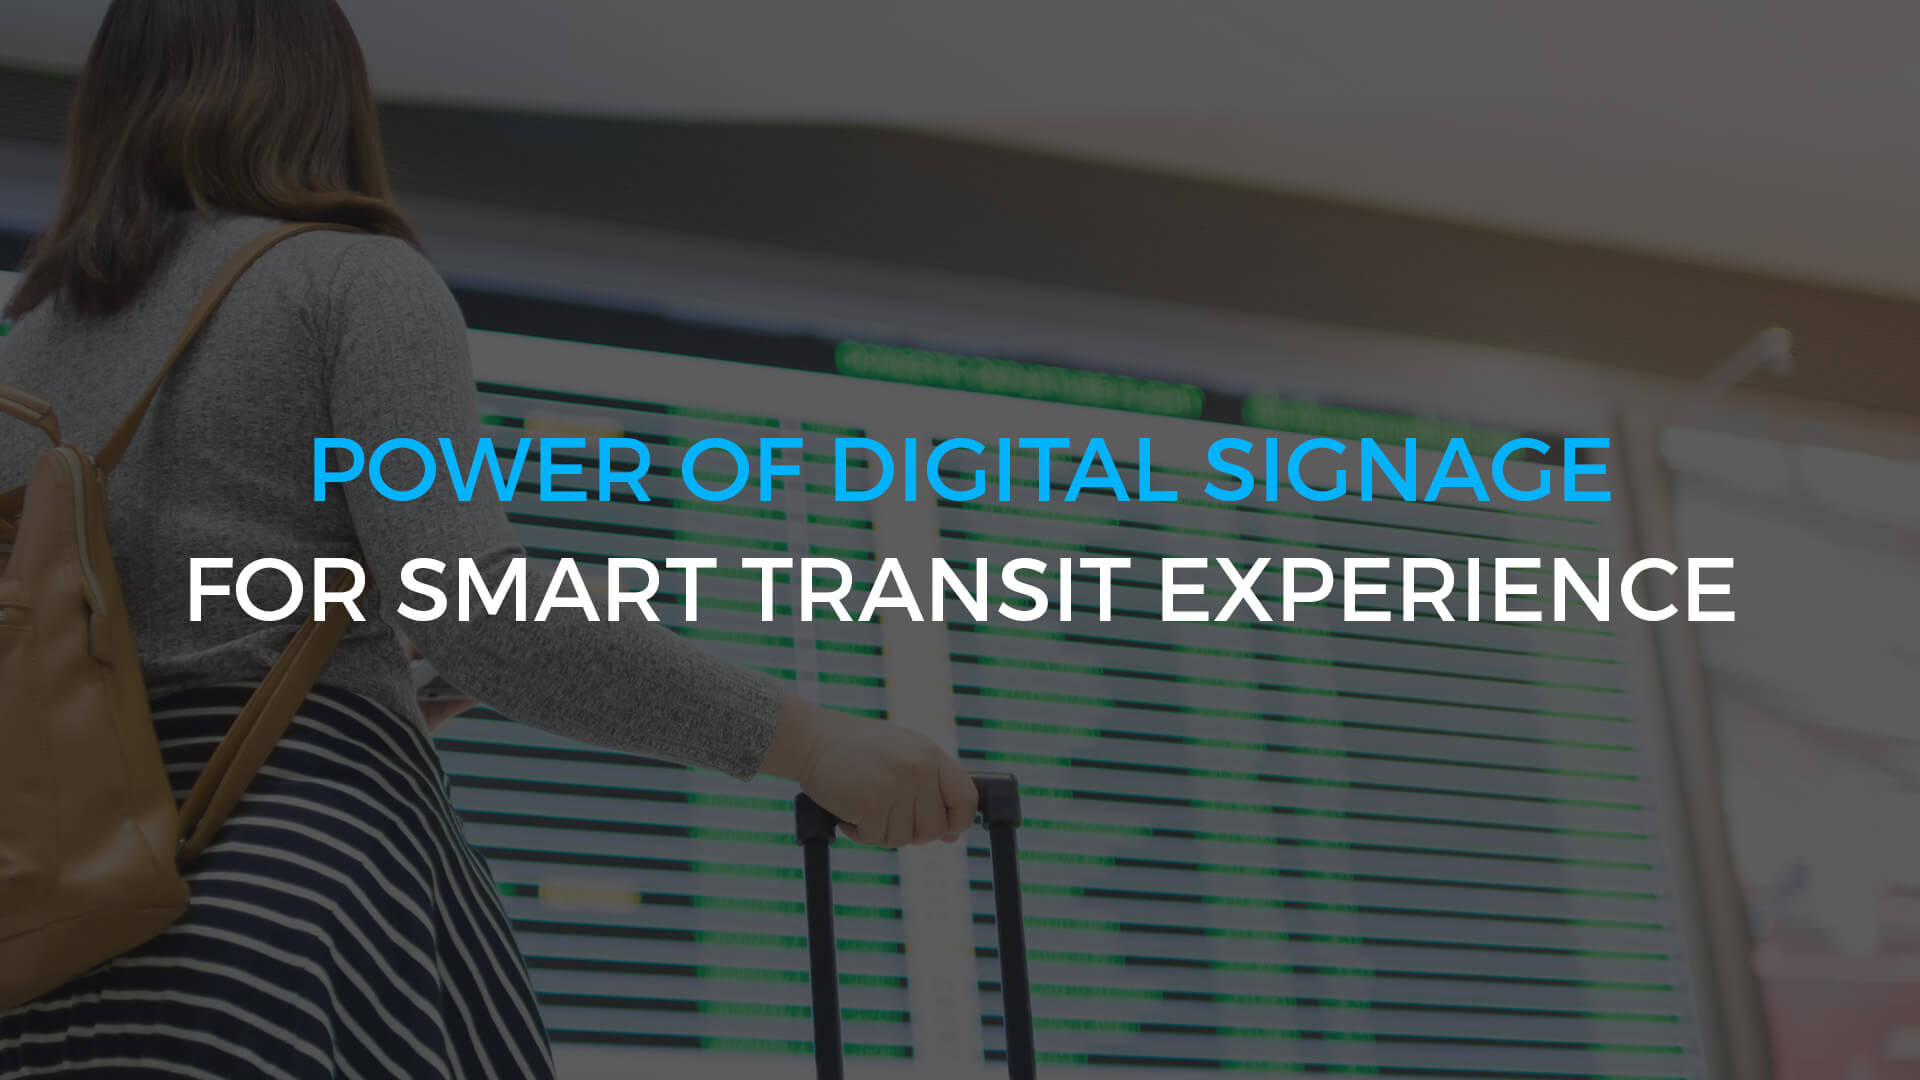 Power of Digital Signage for Smart Transit Experience